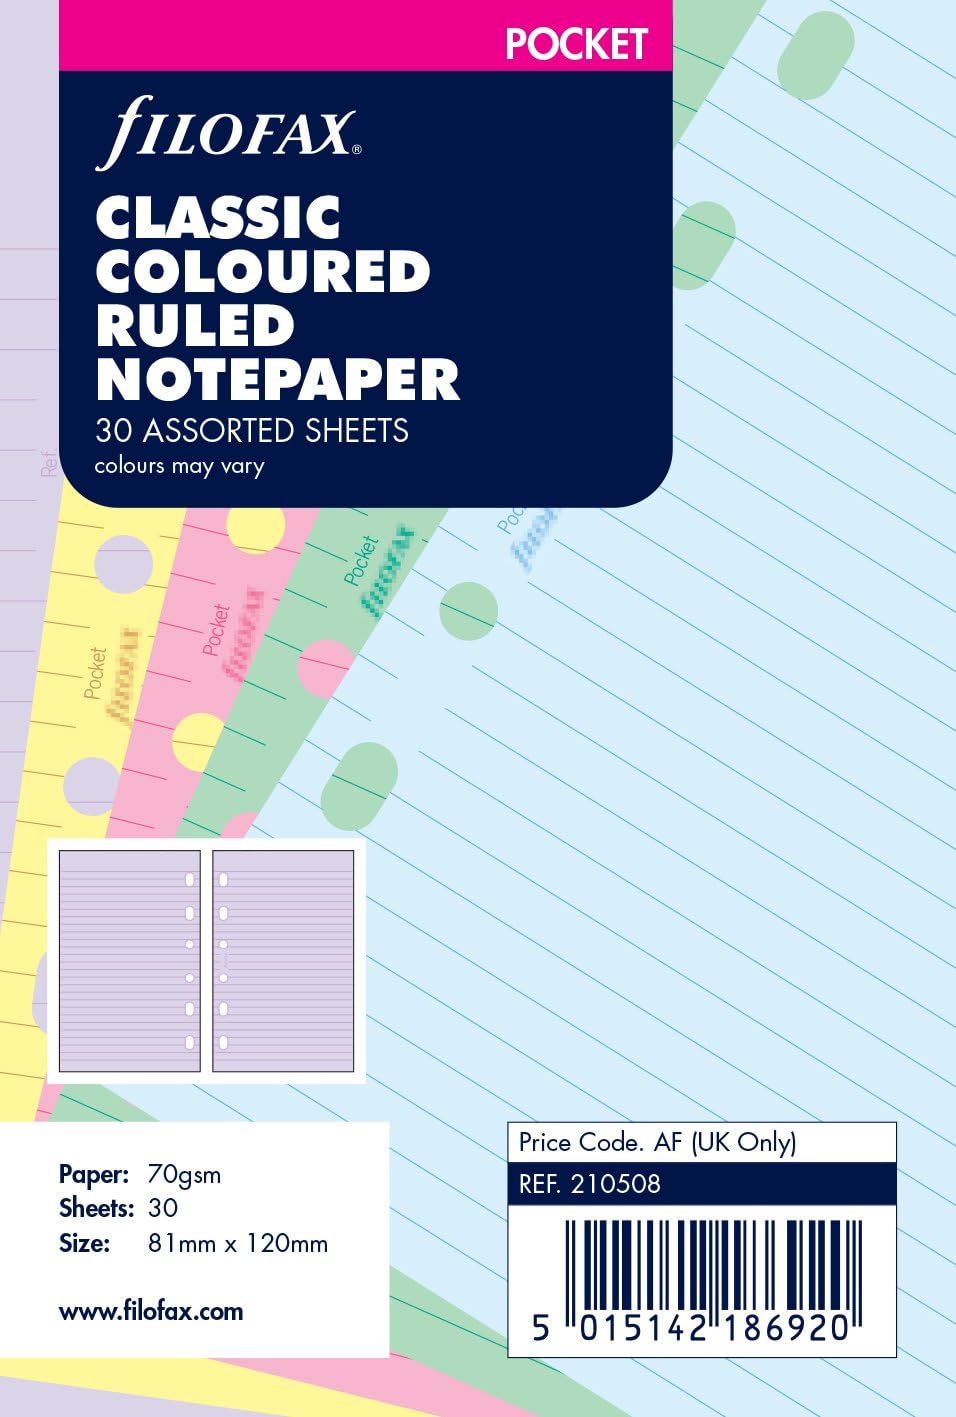 Filofax Pocket Classic Coloured Ruled Notepaper 30 Sheets 81 x 120mm RRP 3.73 CLEARANCE XL 1.99